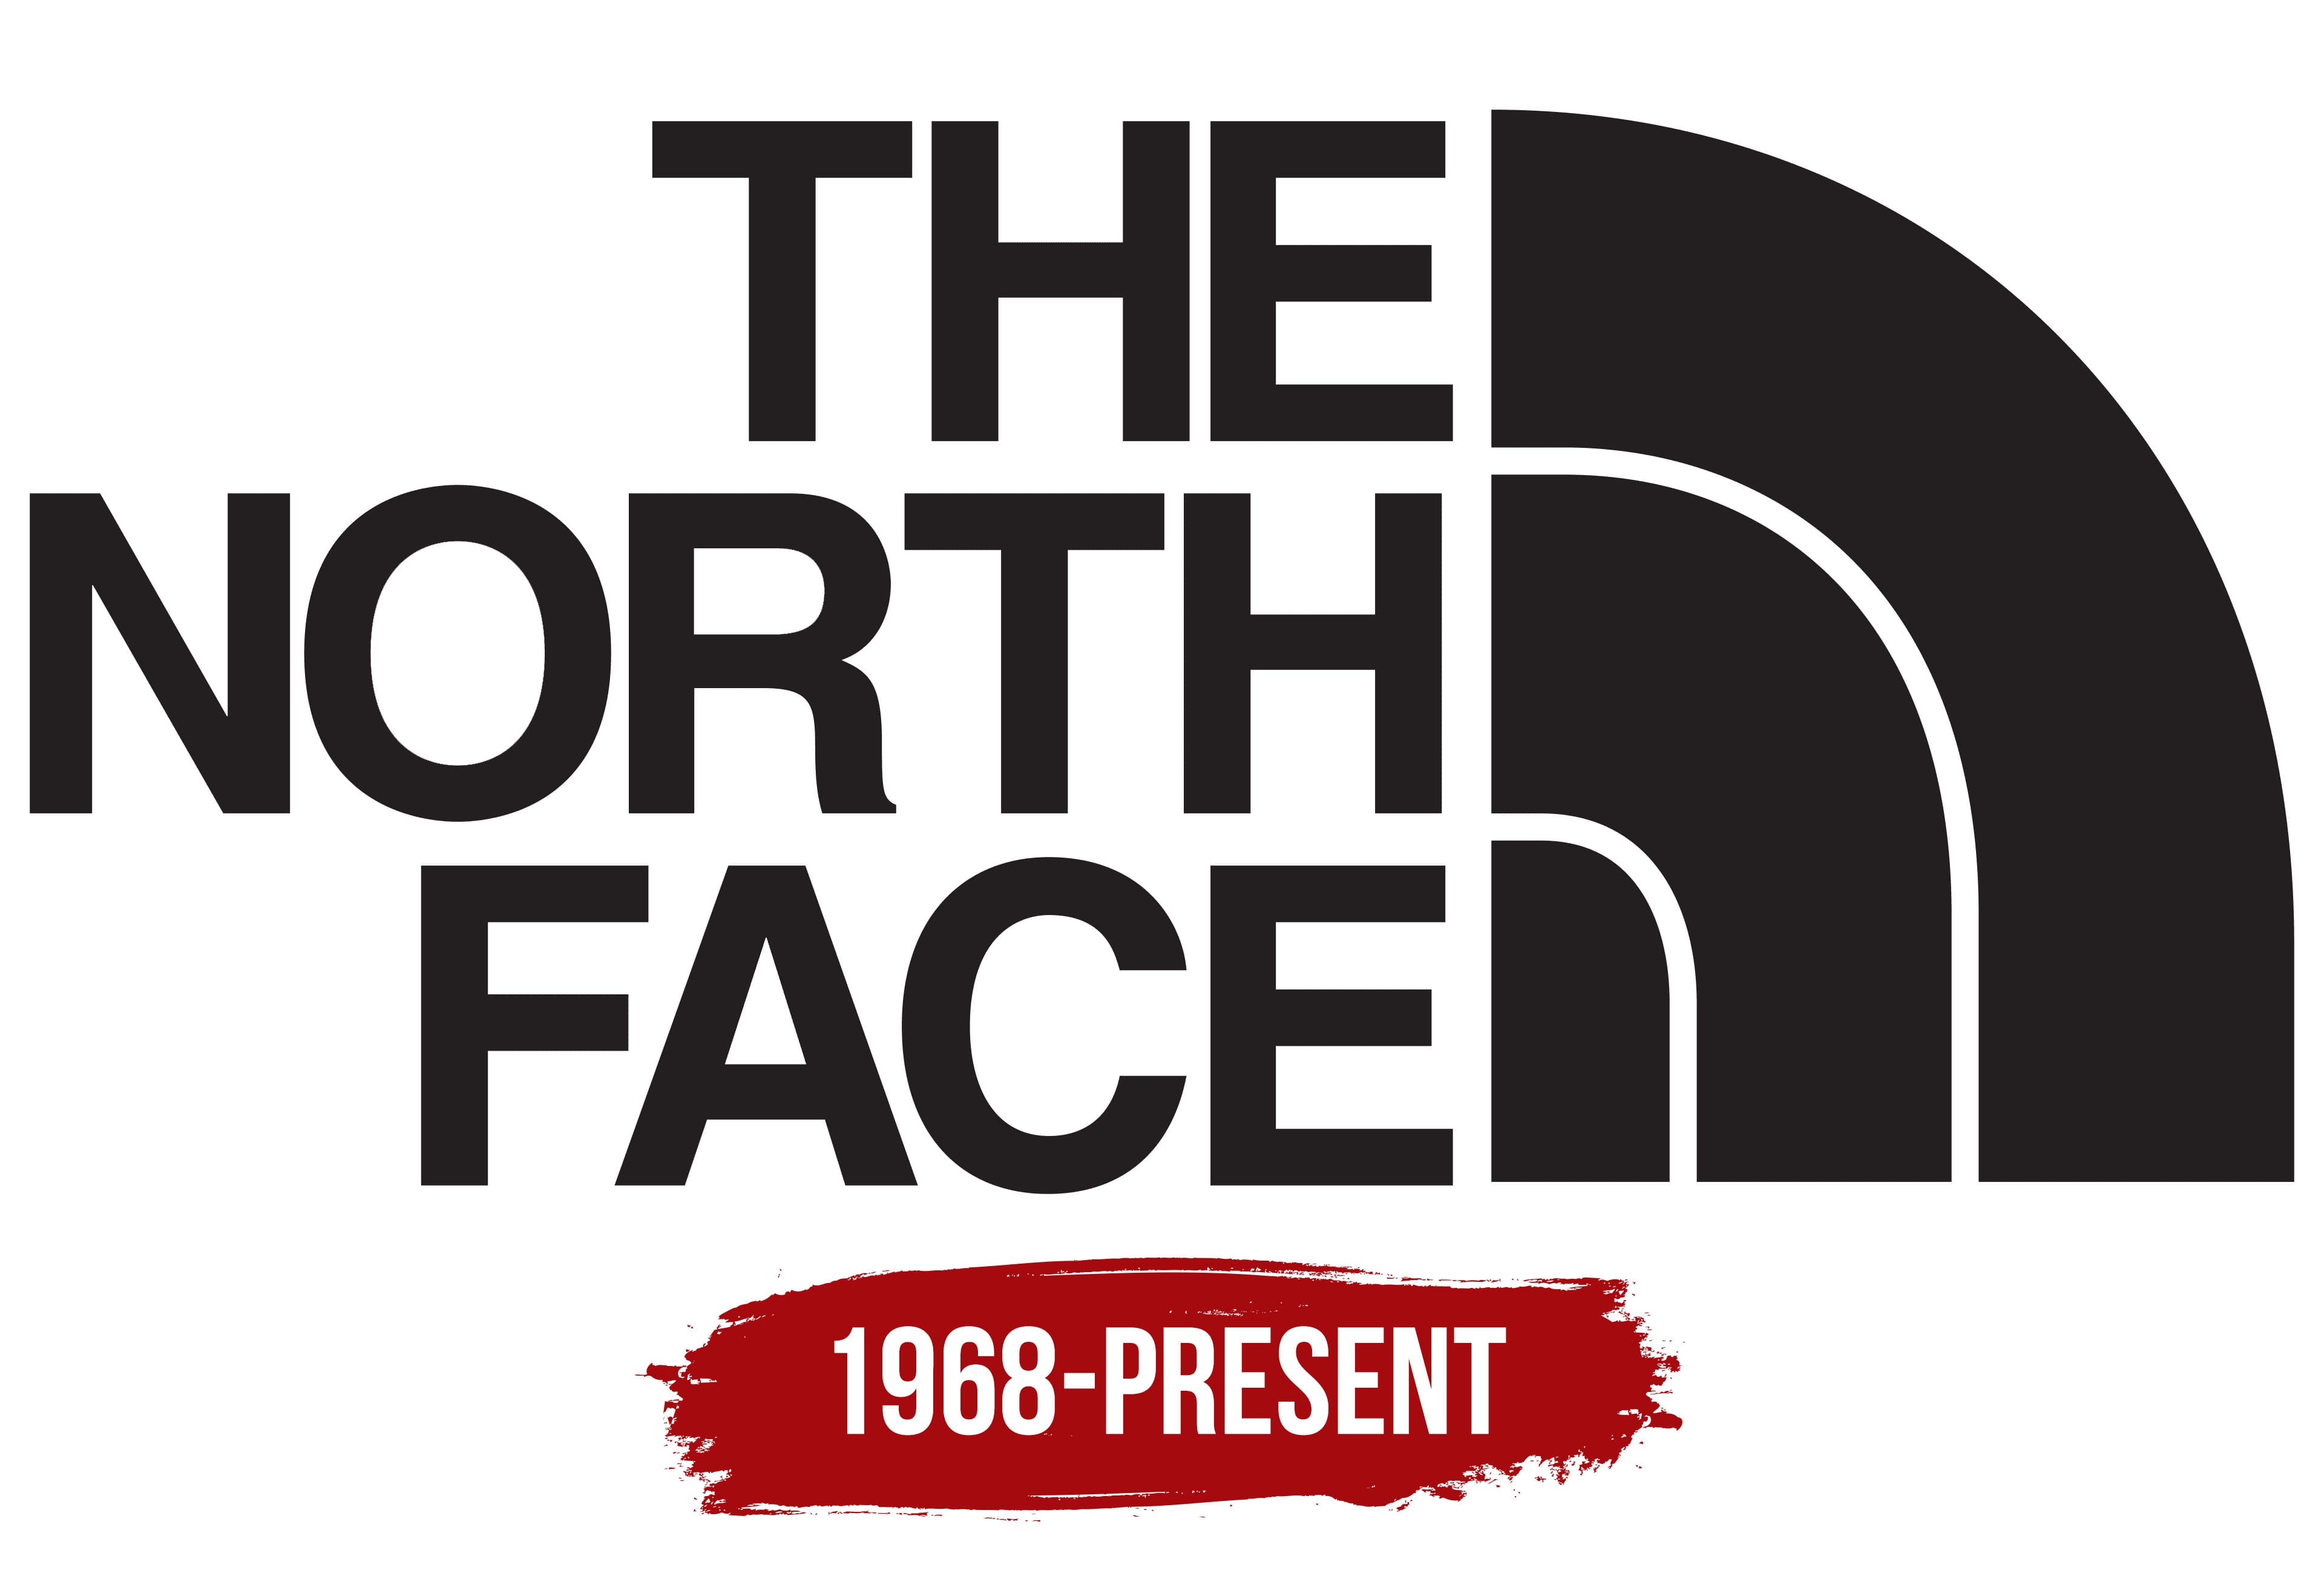 Het spijt me in stand houden Trouw The North Face Logo, symbol, meaning, history, PNG, brand